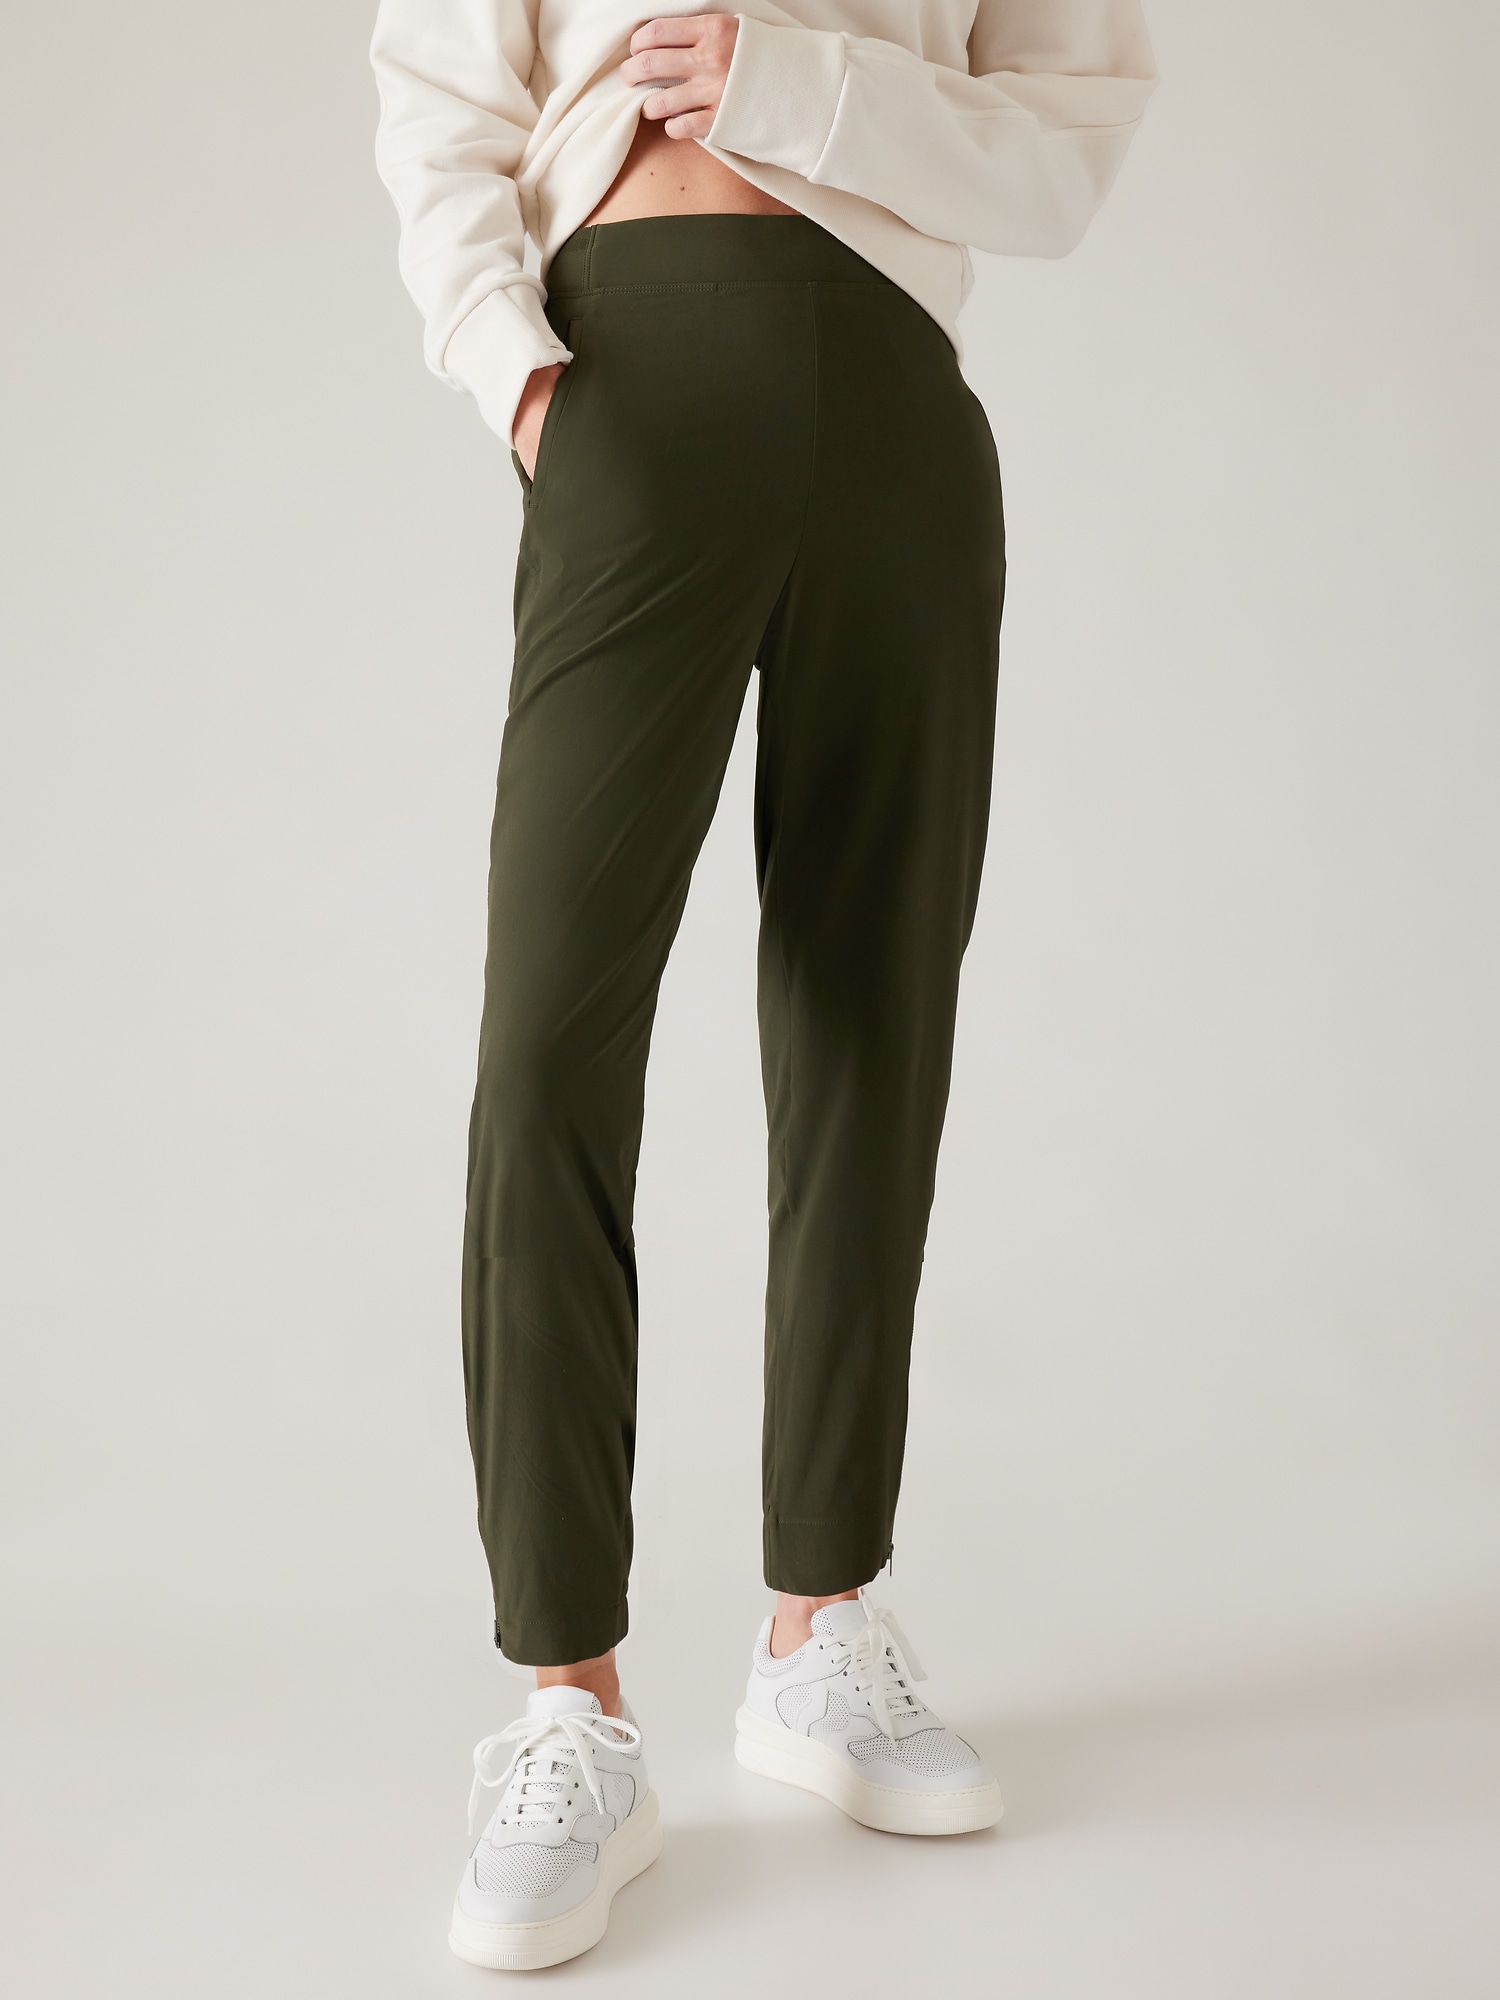 Athleta Brooklyn Heights High Rise Jogger In Aspen Olive